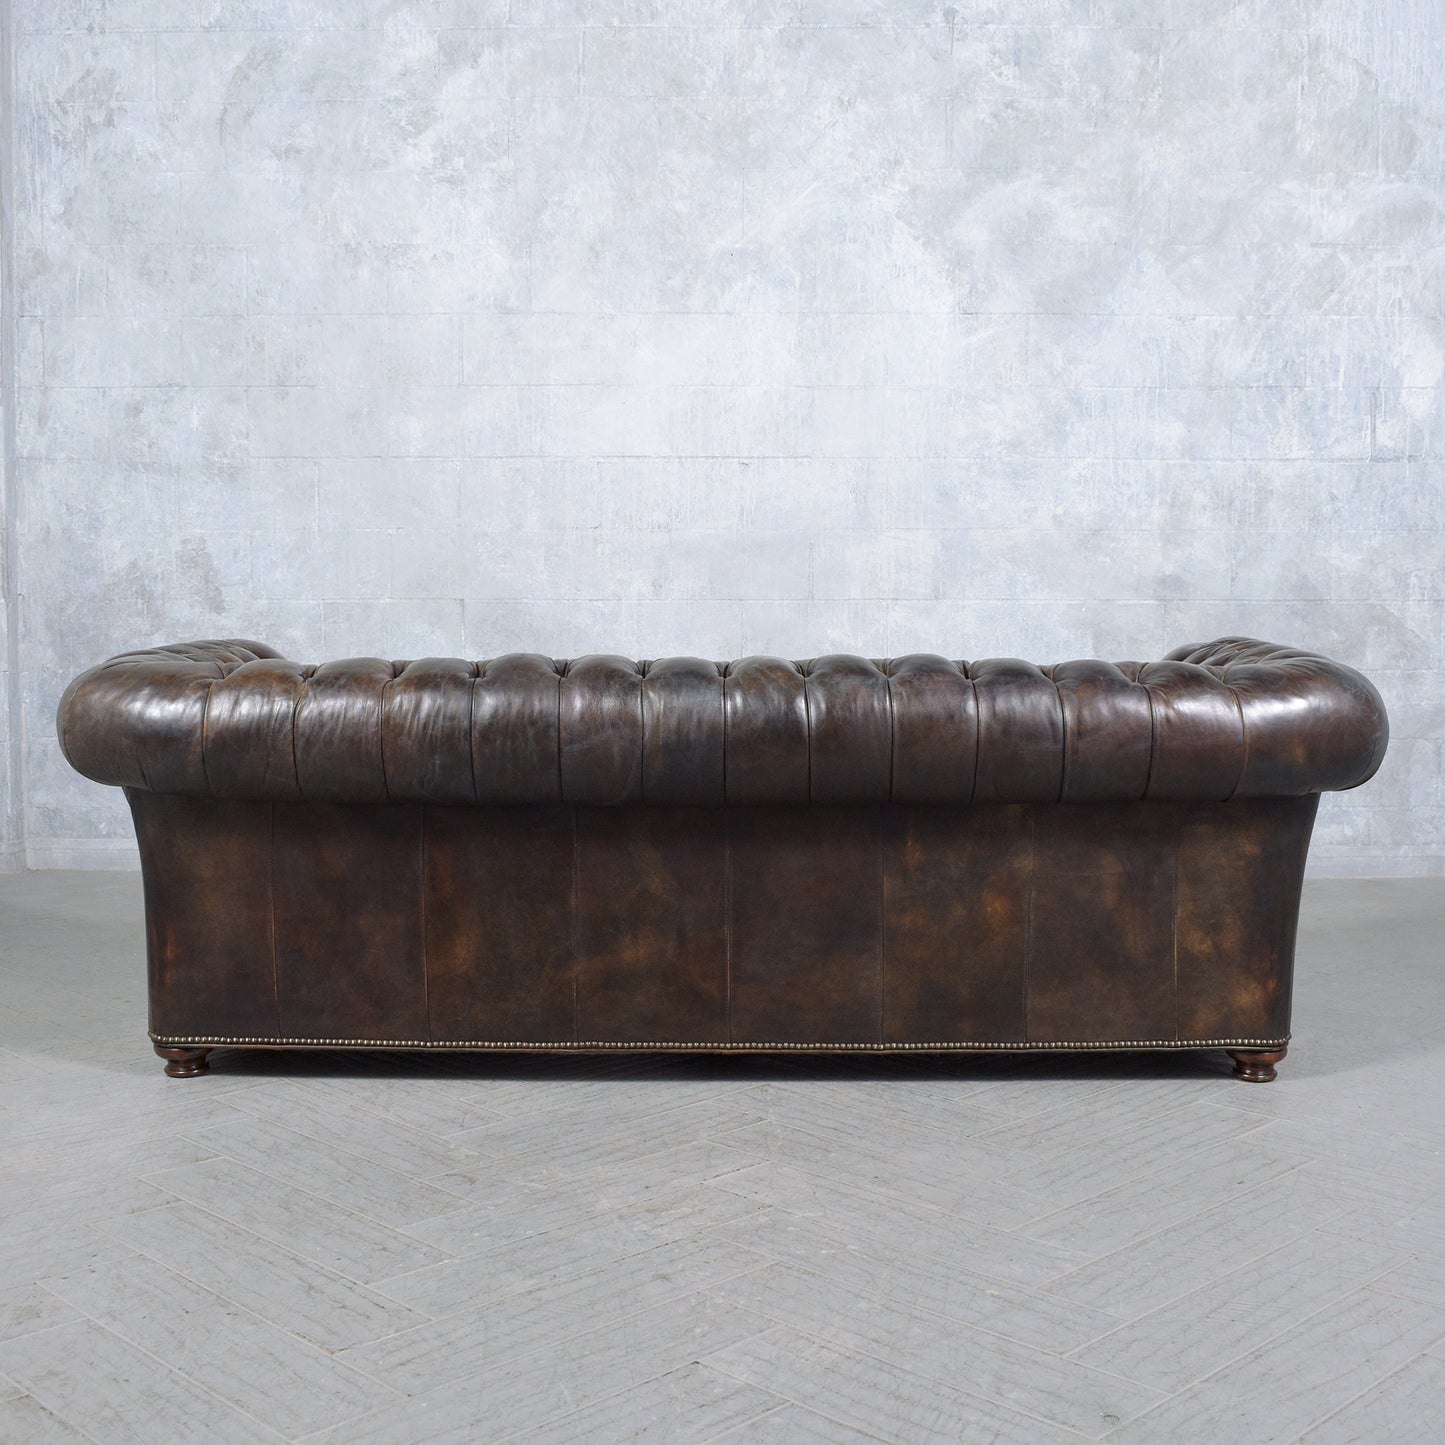 Handcrafted Original 1970s Vintage Brown Leather Chesterfield Sofa